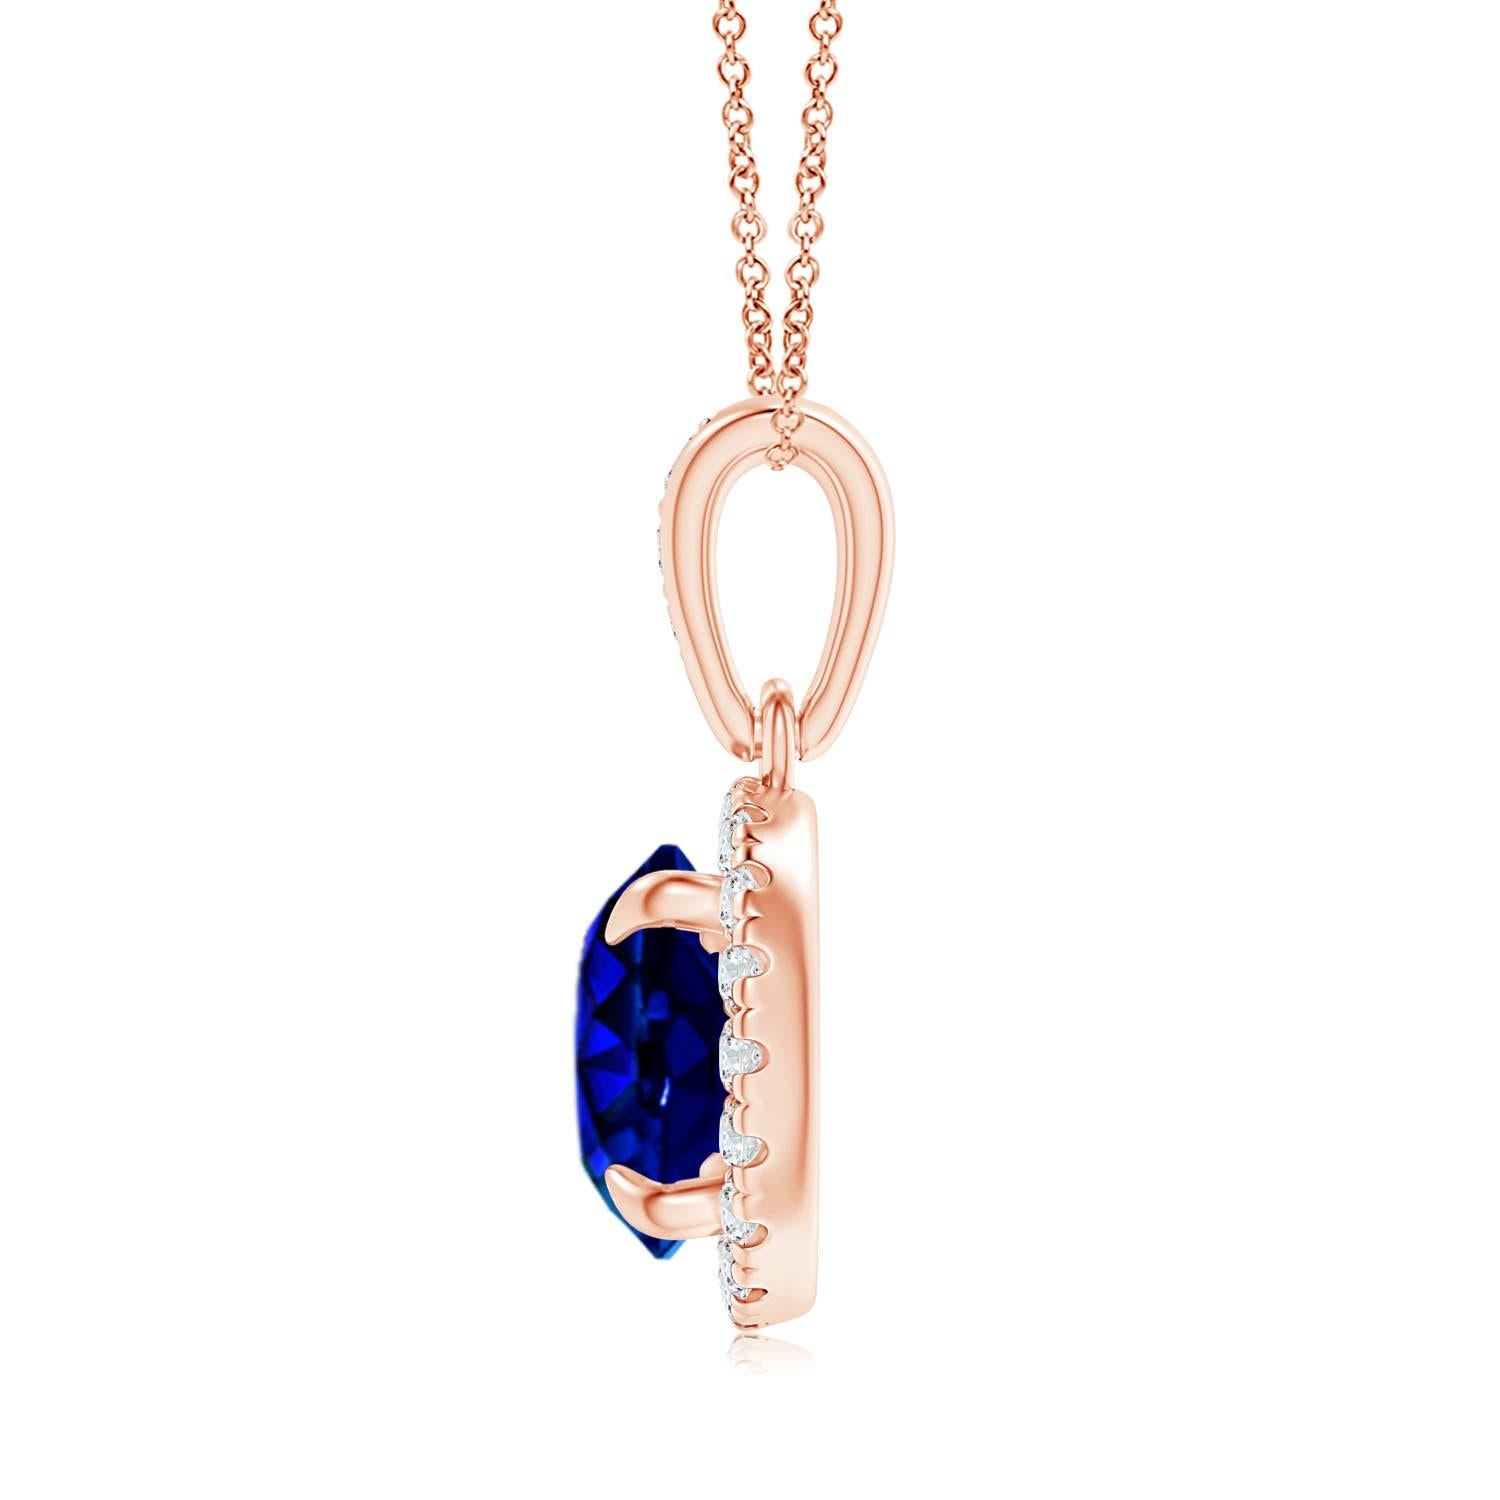 This stunning pendant showcases a GIA certified sapphire, secured in a claw setting. Glittering round diamonds encircle this round blue gemstone in a brilliant halo and illuminate its mesmerizing hue. Additional diamonds adorn the bale and